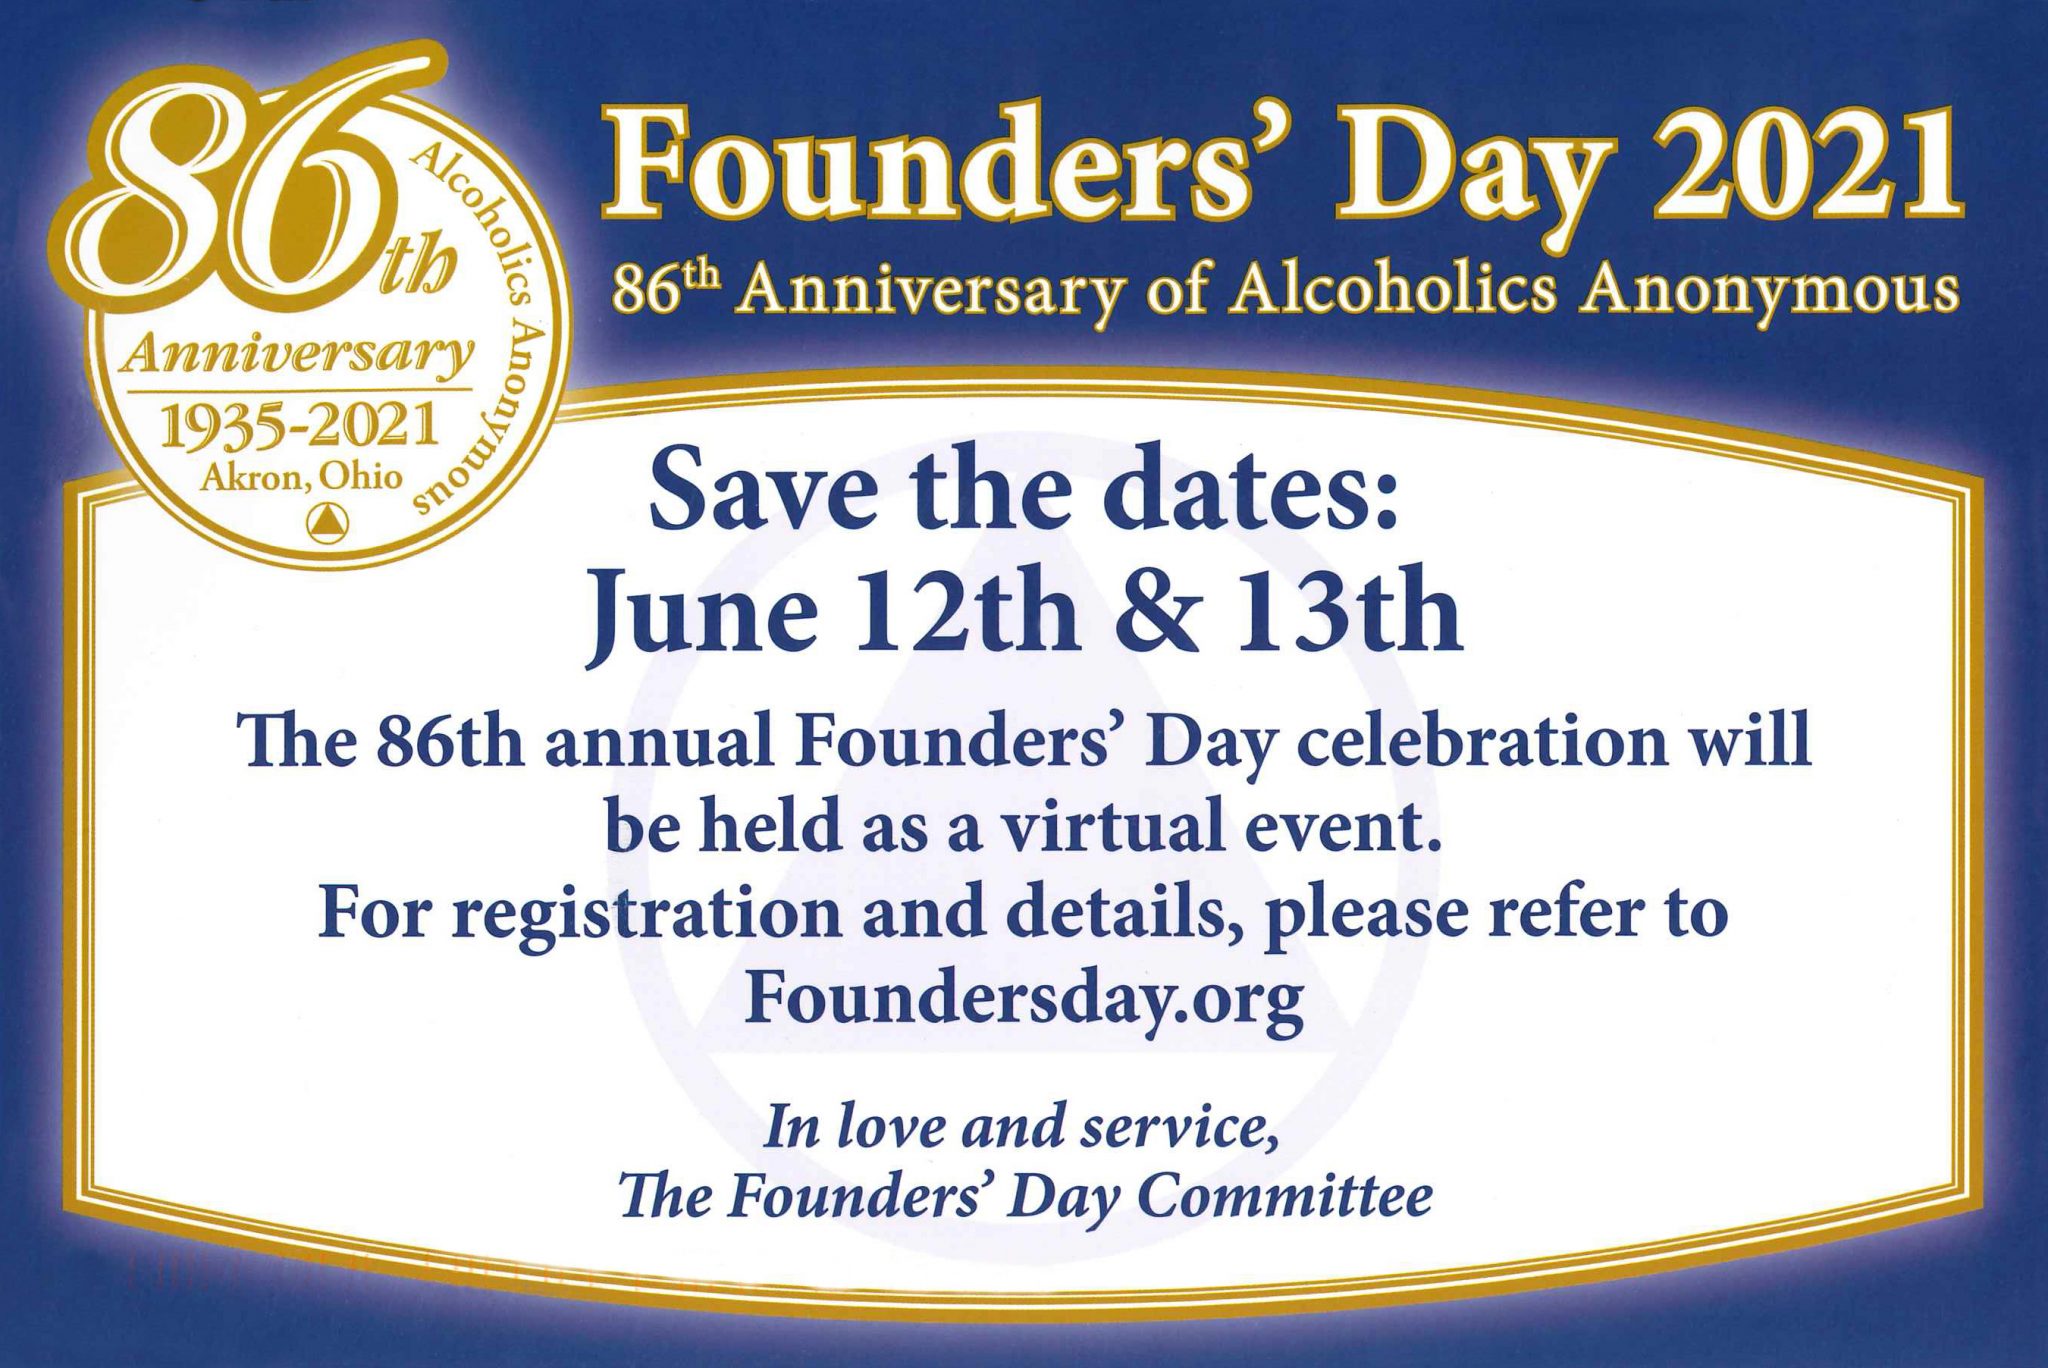 Founders' Day Akron 2021 (Online) - Intergroup | Central Office Serving Sf & Mari
n